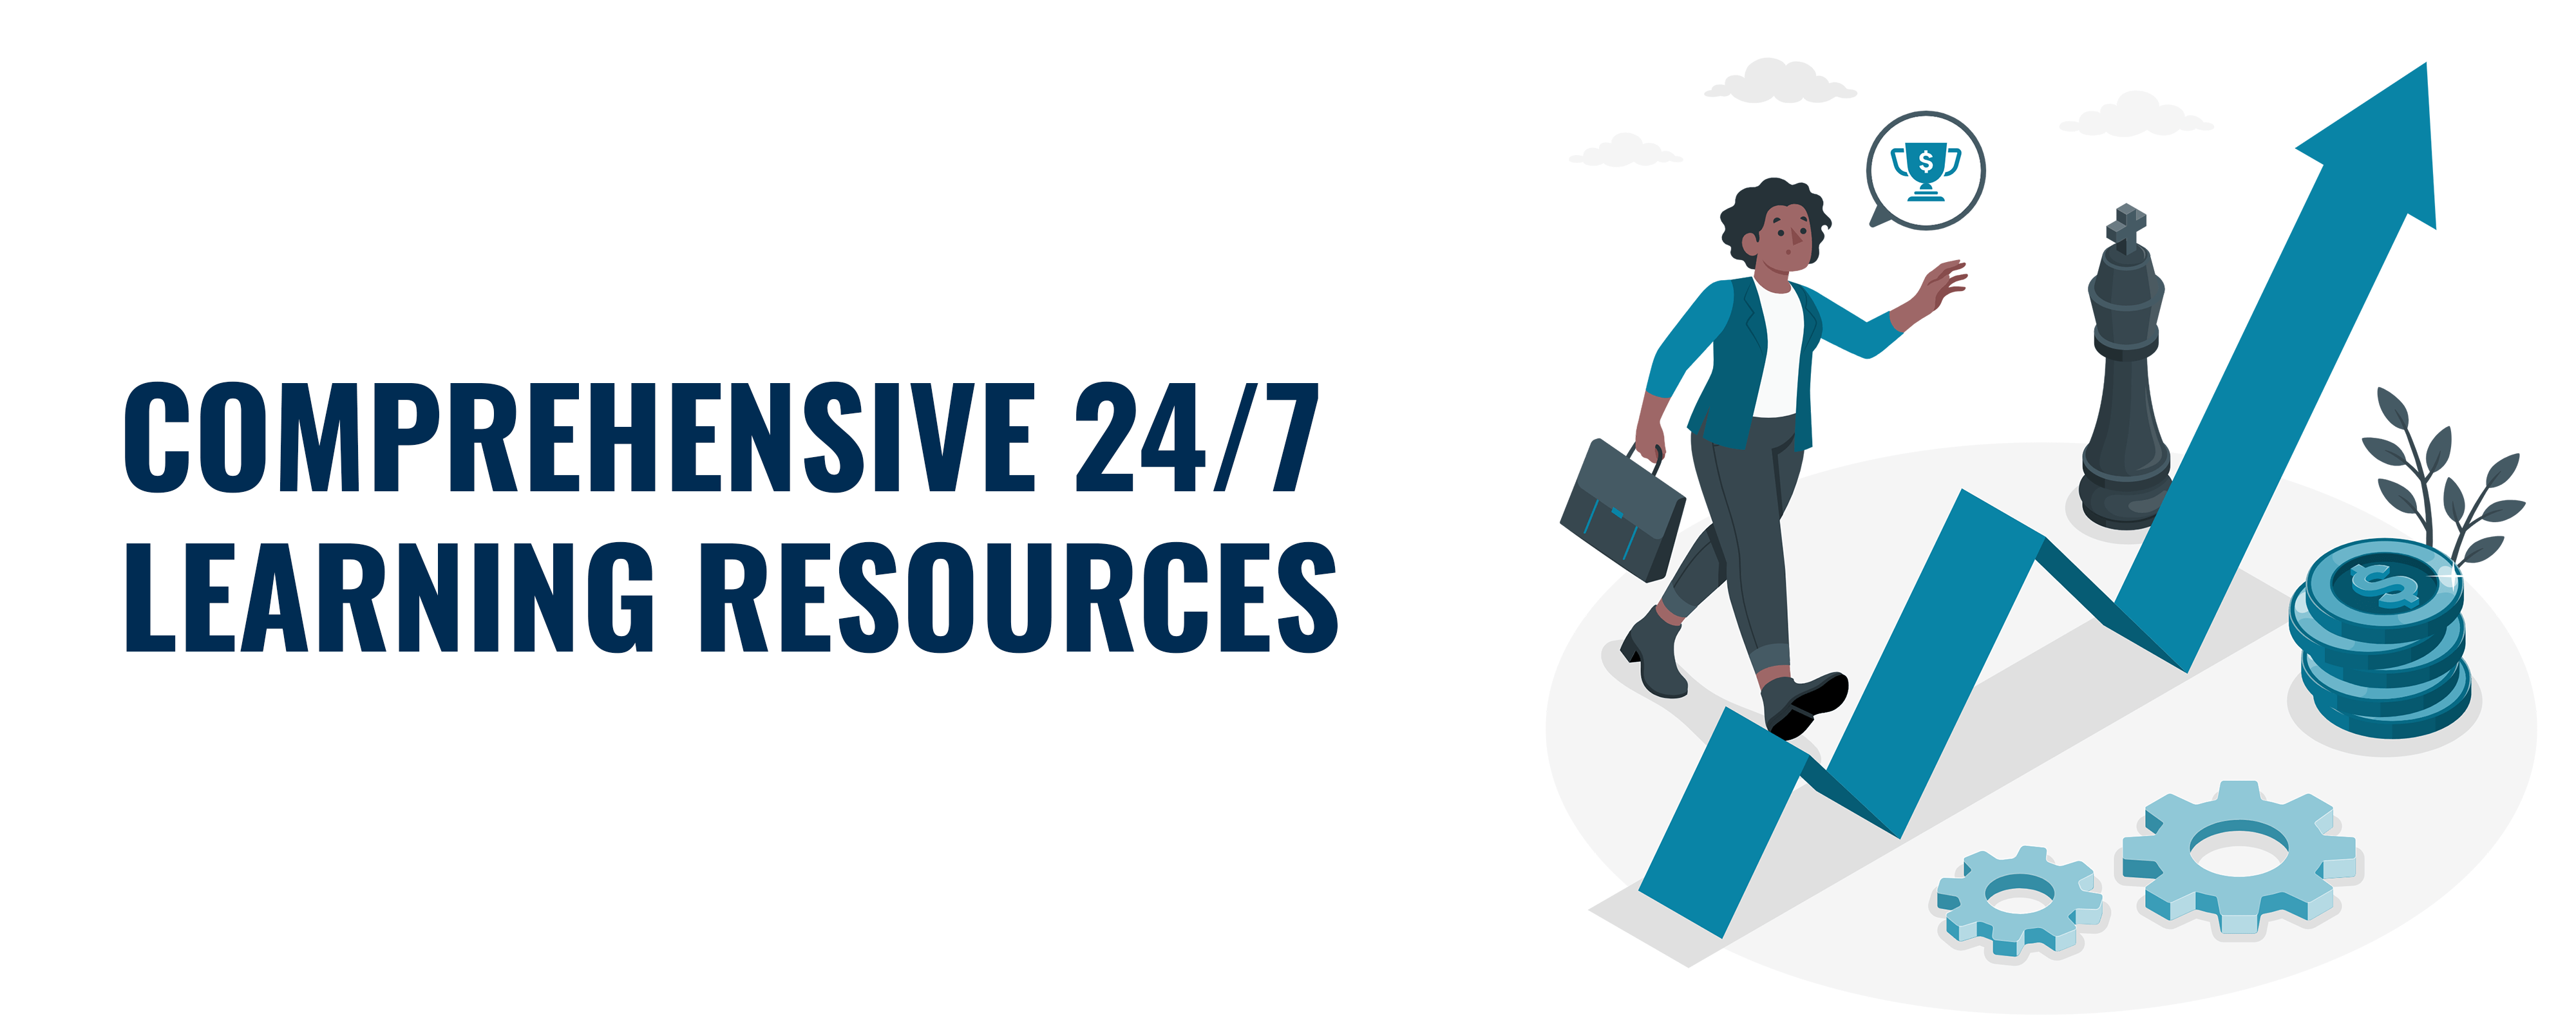 Comprehensive 24/7 Learning Resources